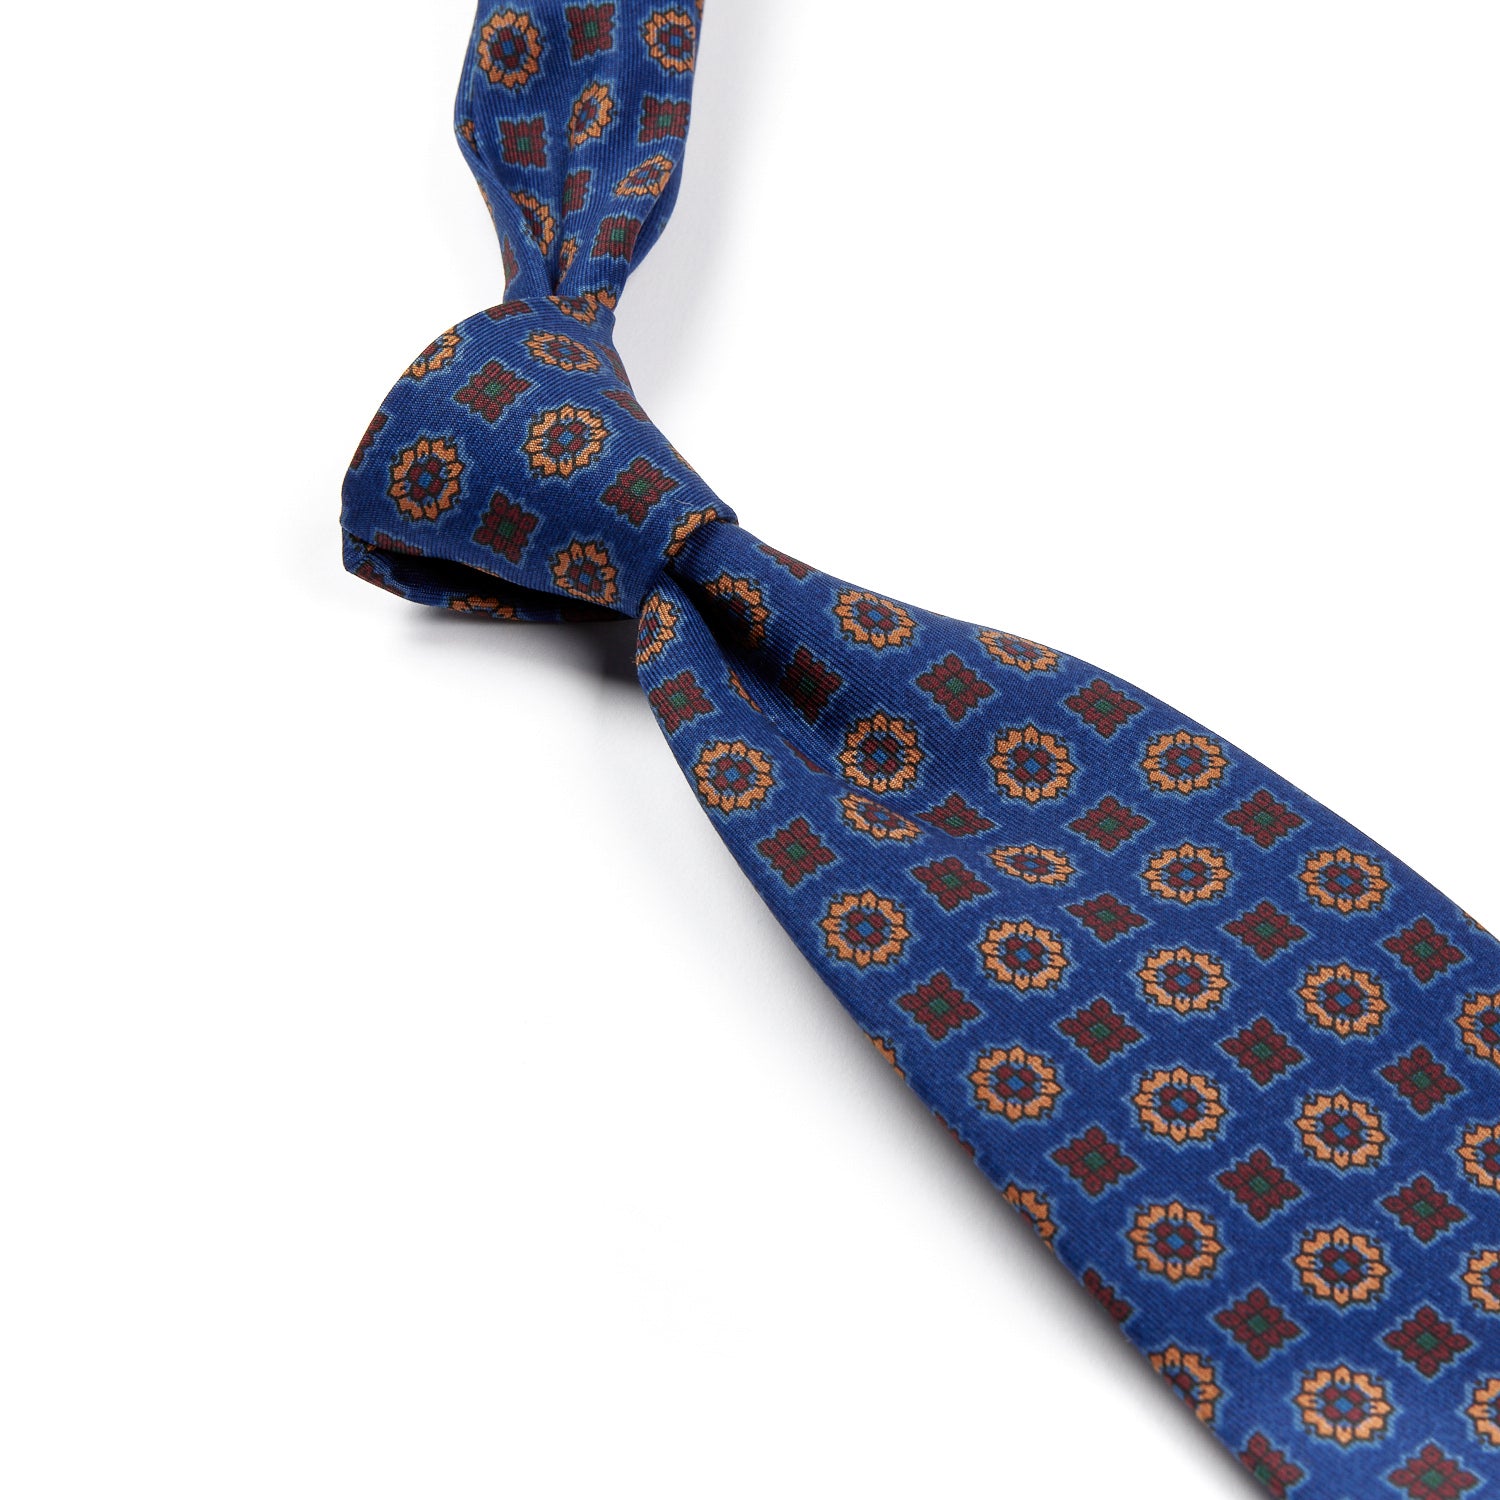 A high-quality Sovereign Grade Blue Floral Diamond Ancient Madder Tie with handmade brown and gold designs from KirbyAllison.com.